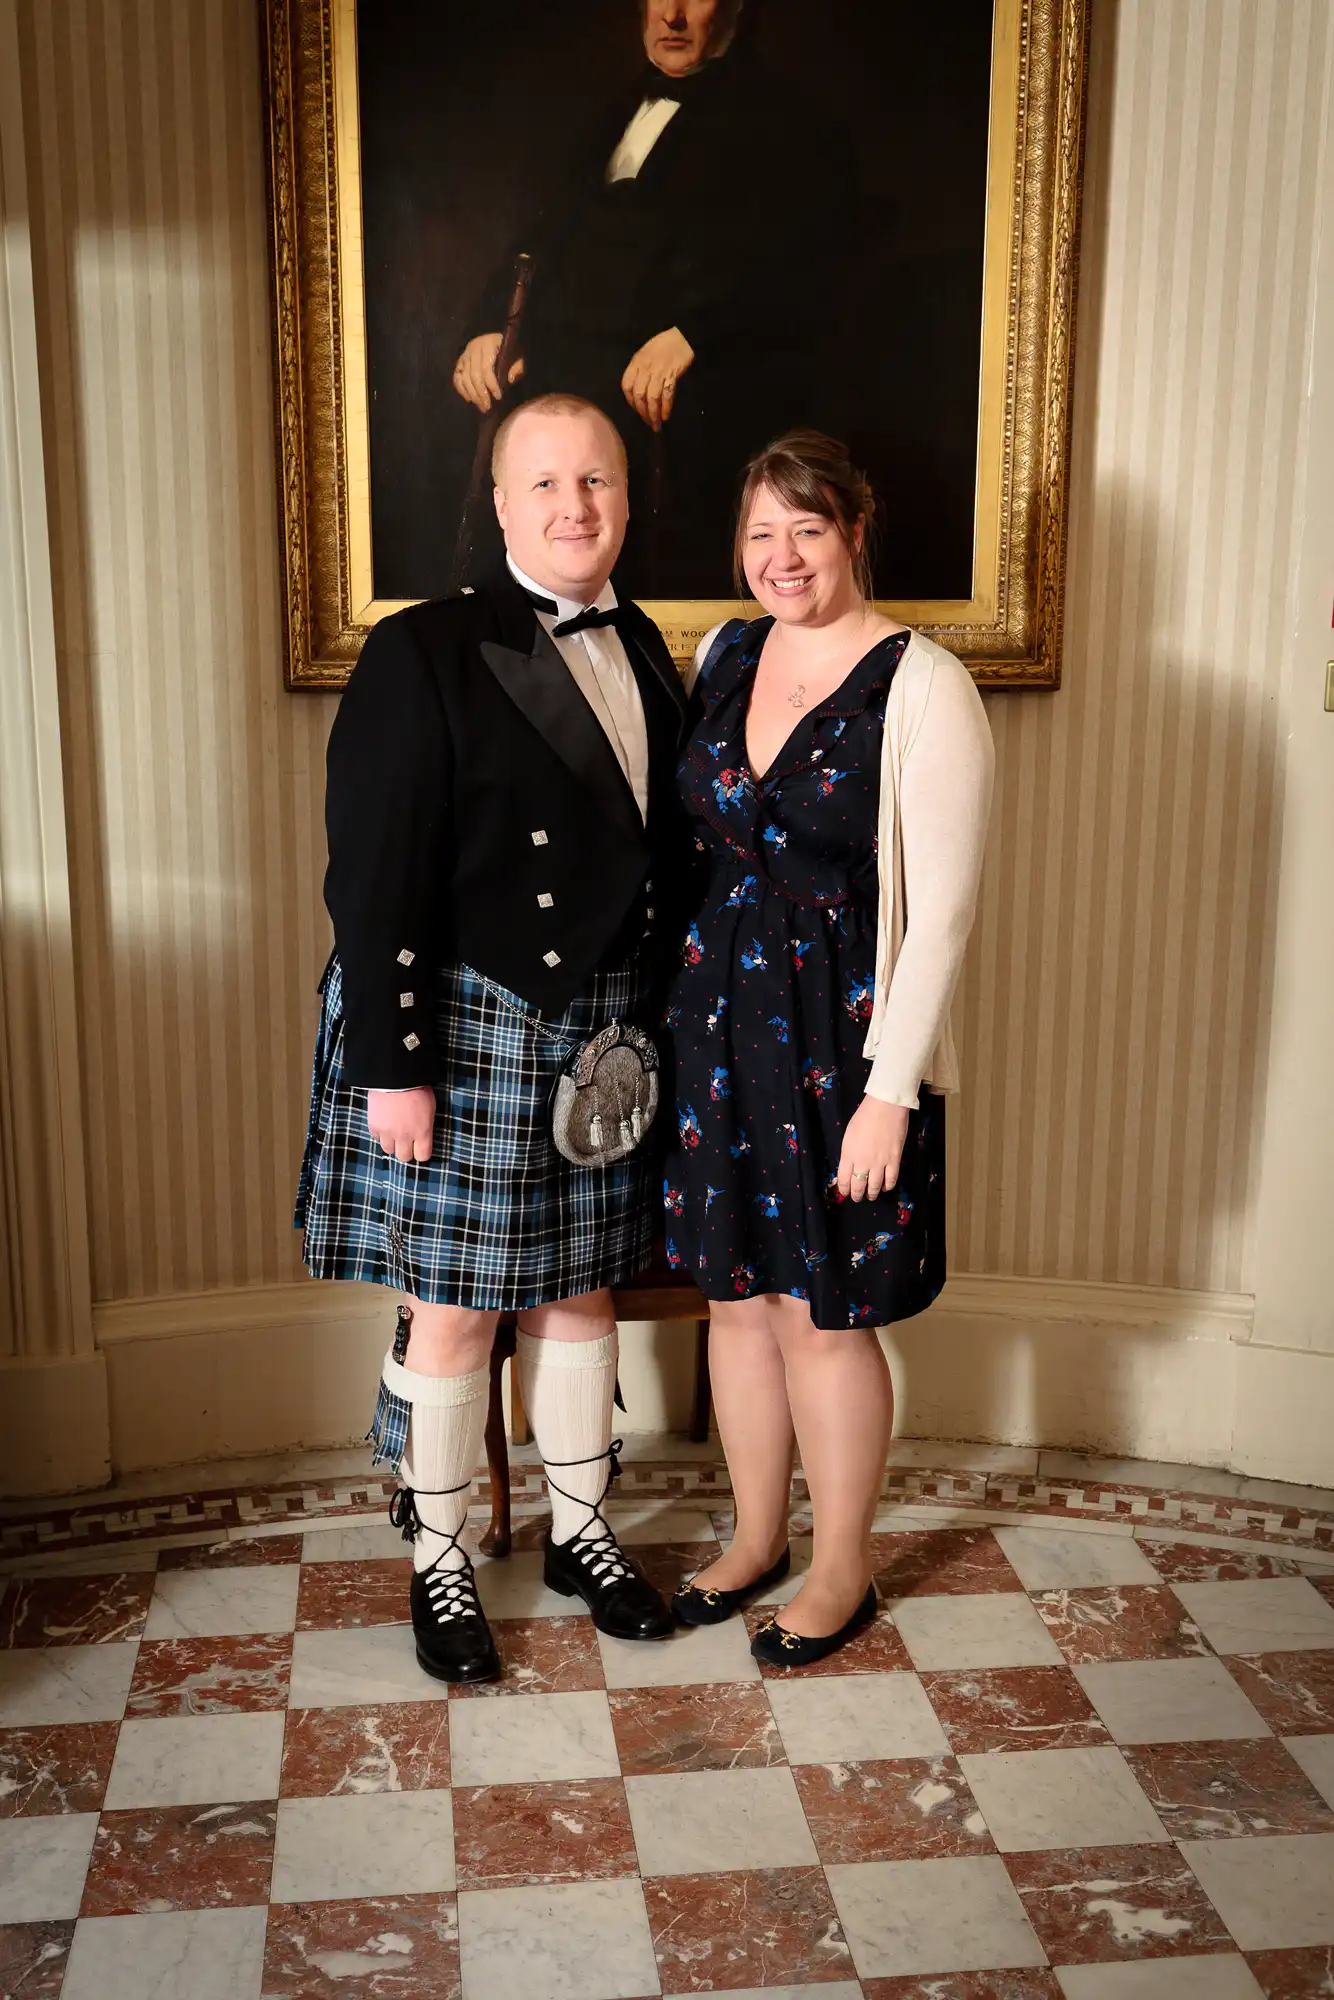 A man in a traditional kilt and a woman in a blue floral dress smiling while standing in front of a portrait in an elegant room.